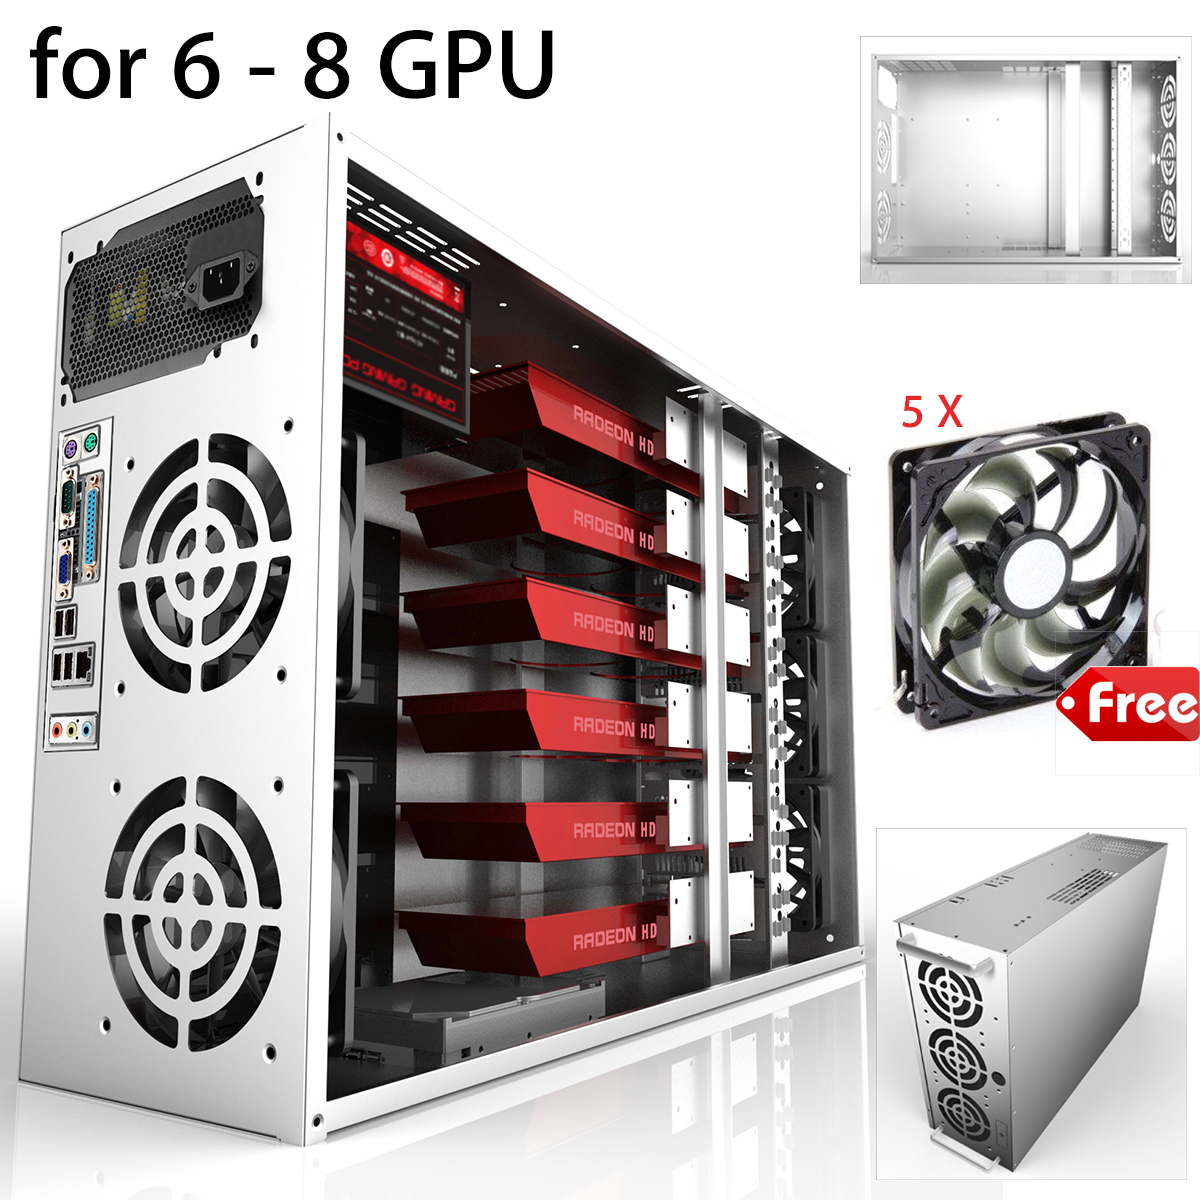 Crypto-Coin-Open-Air-Mining-Frame-Rig-Graphics-Case-For-6-8-GPU-ETH-BTC-Ethereum-1205686